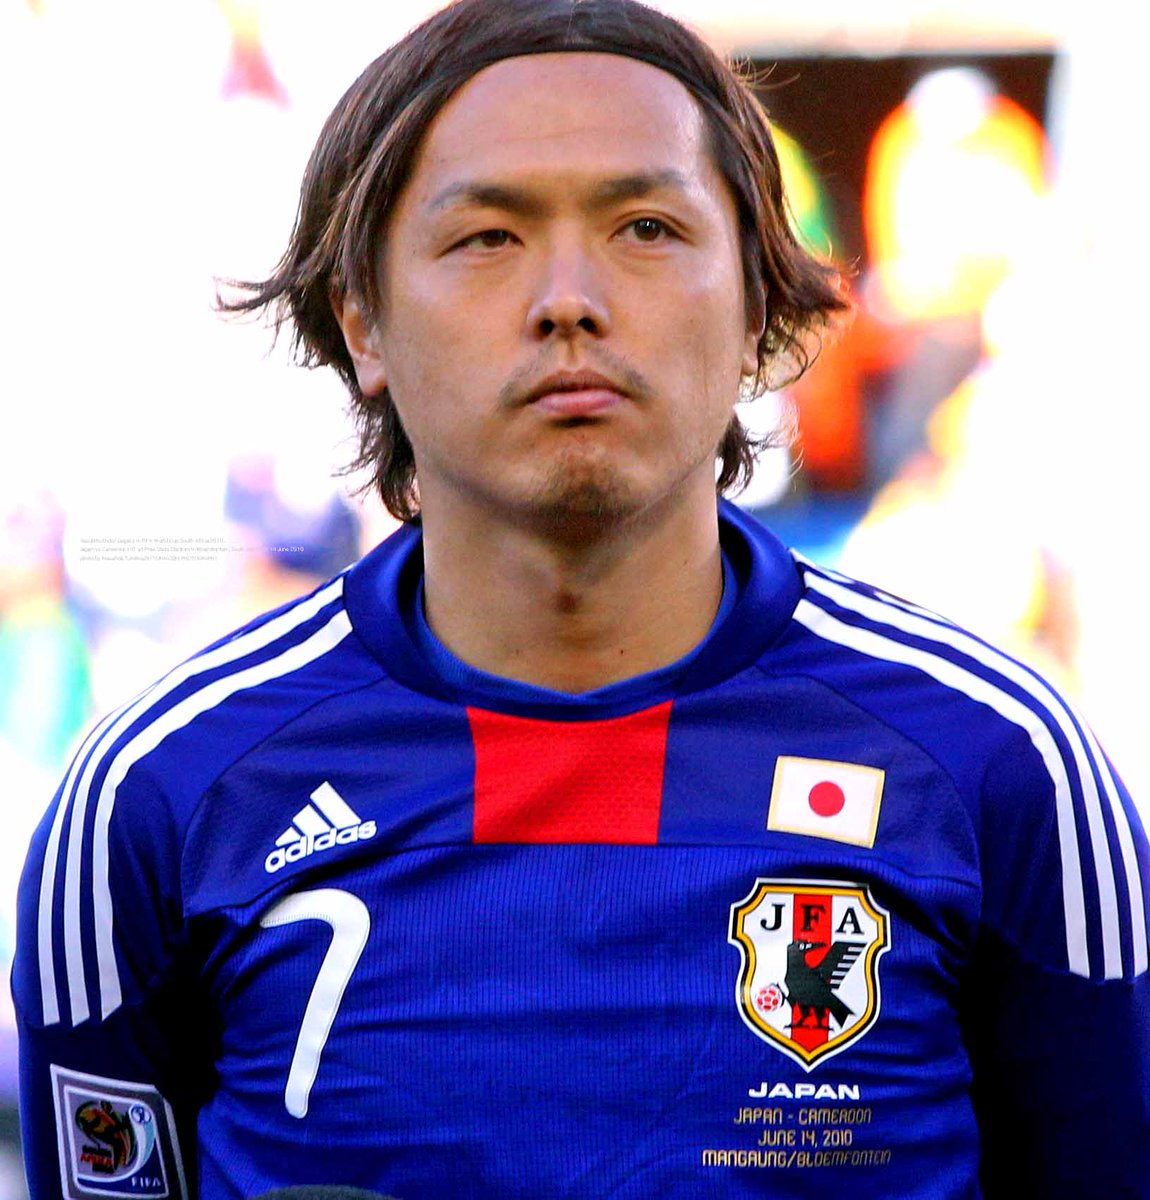 Tphoto 遠藤保仁７ 日本代表 10ワールドカップ南アフリカ Yasuhito Endo7 Japan In Fifa World Cup South Africa10 Japan Vs Cameroon1 0 At Free State Stadium In Bloemfontein South Africa On 14 June 10 Photo By Masahde Tomikoshi